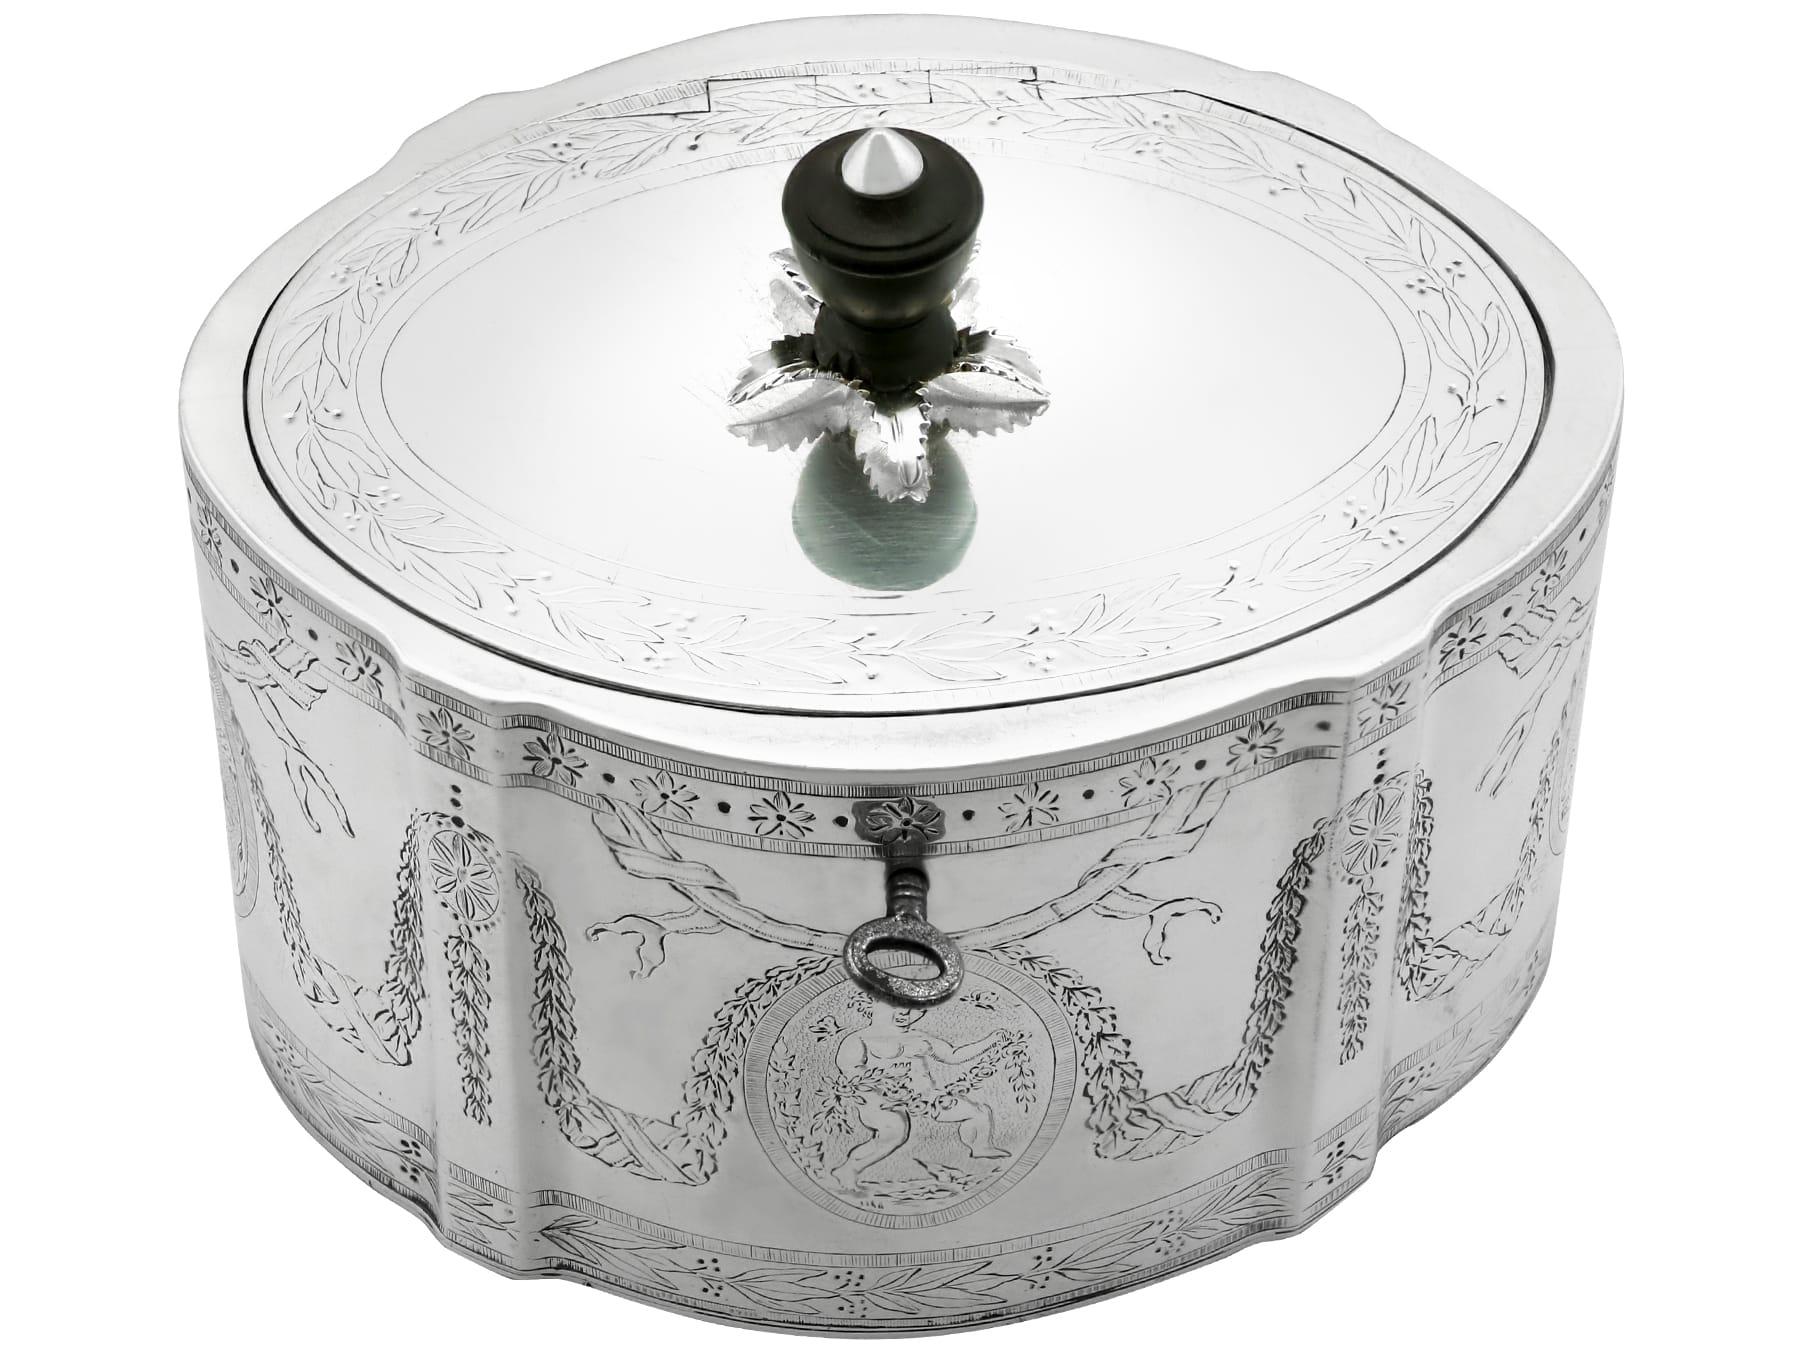 An exceptional, fine and impressive antique Georgian English sterling silver locking tea caddy; an addition to our silver teaware collection.

This exceptional antique George III sterling silver tea caddy has an oval-shaped form.

The surface of